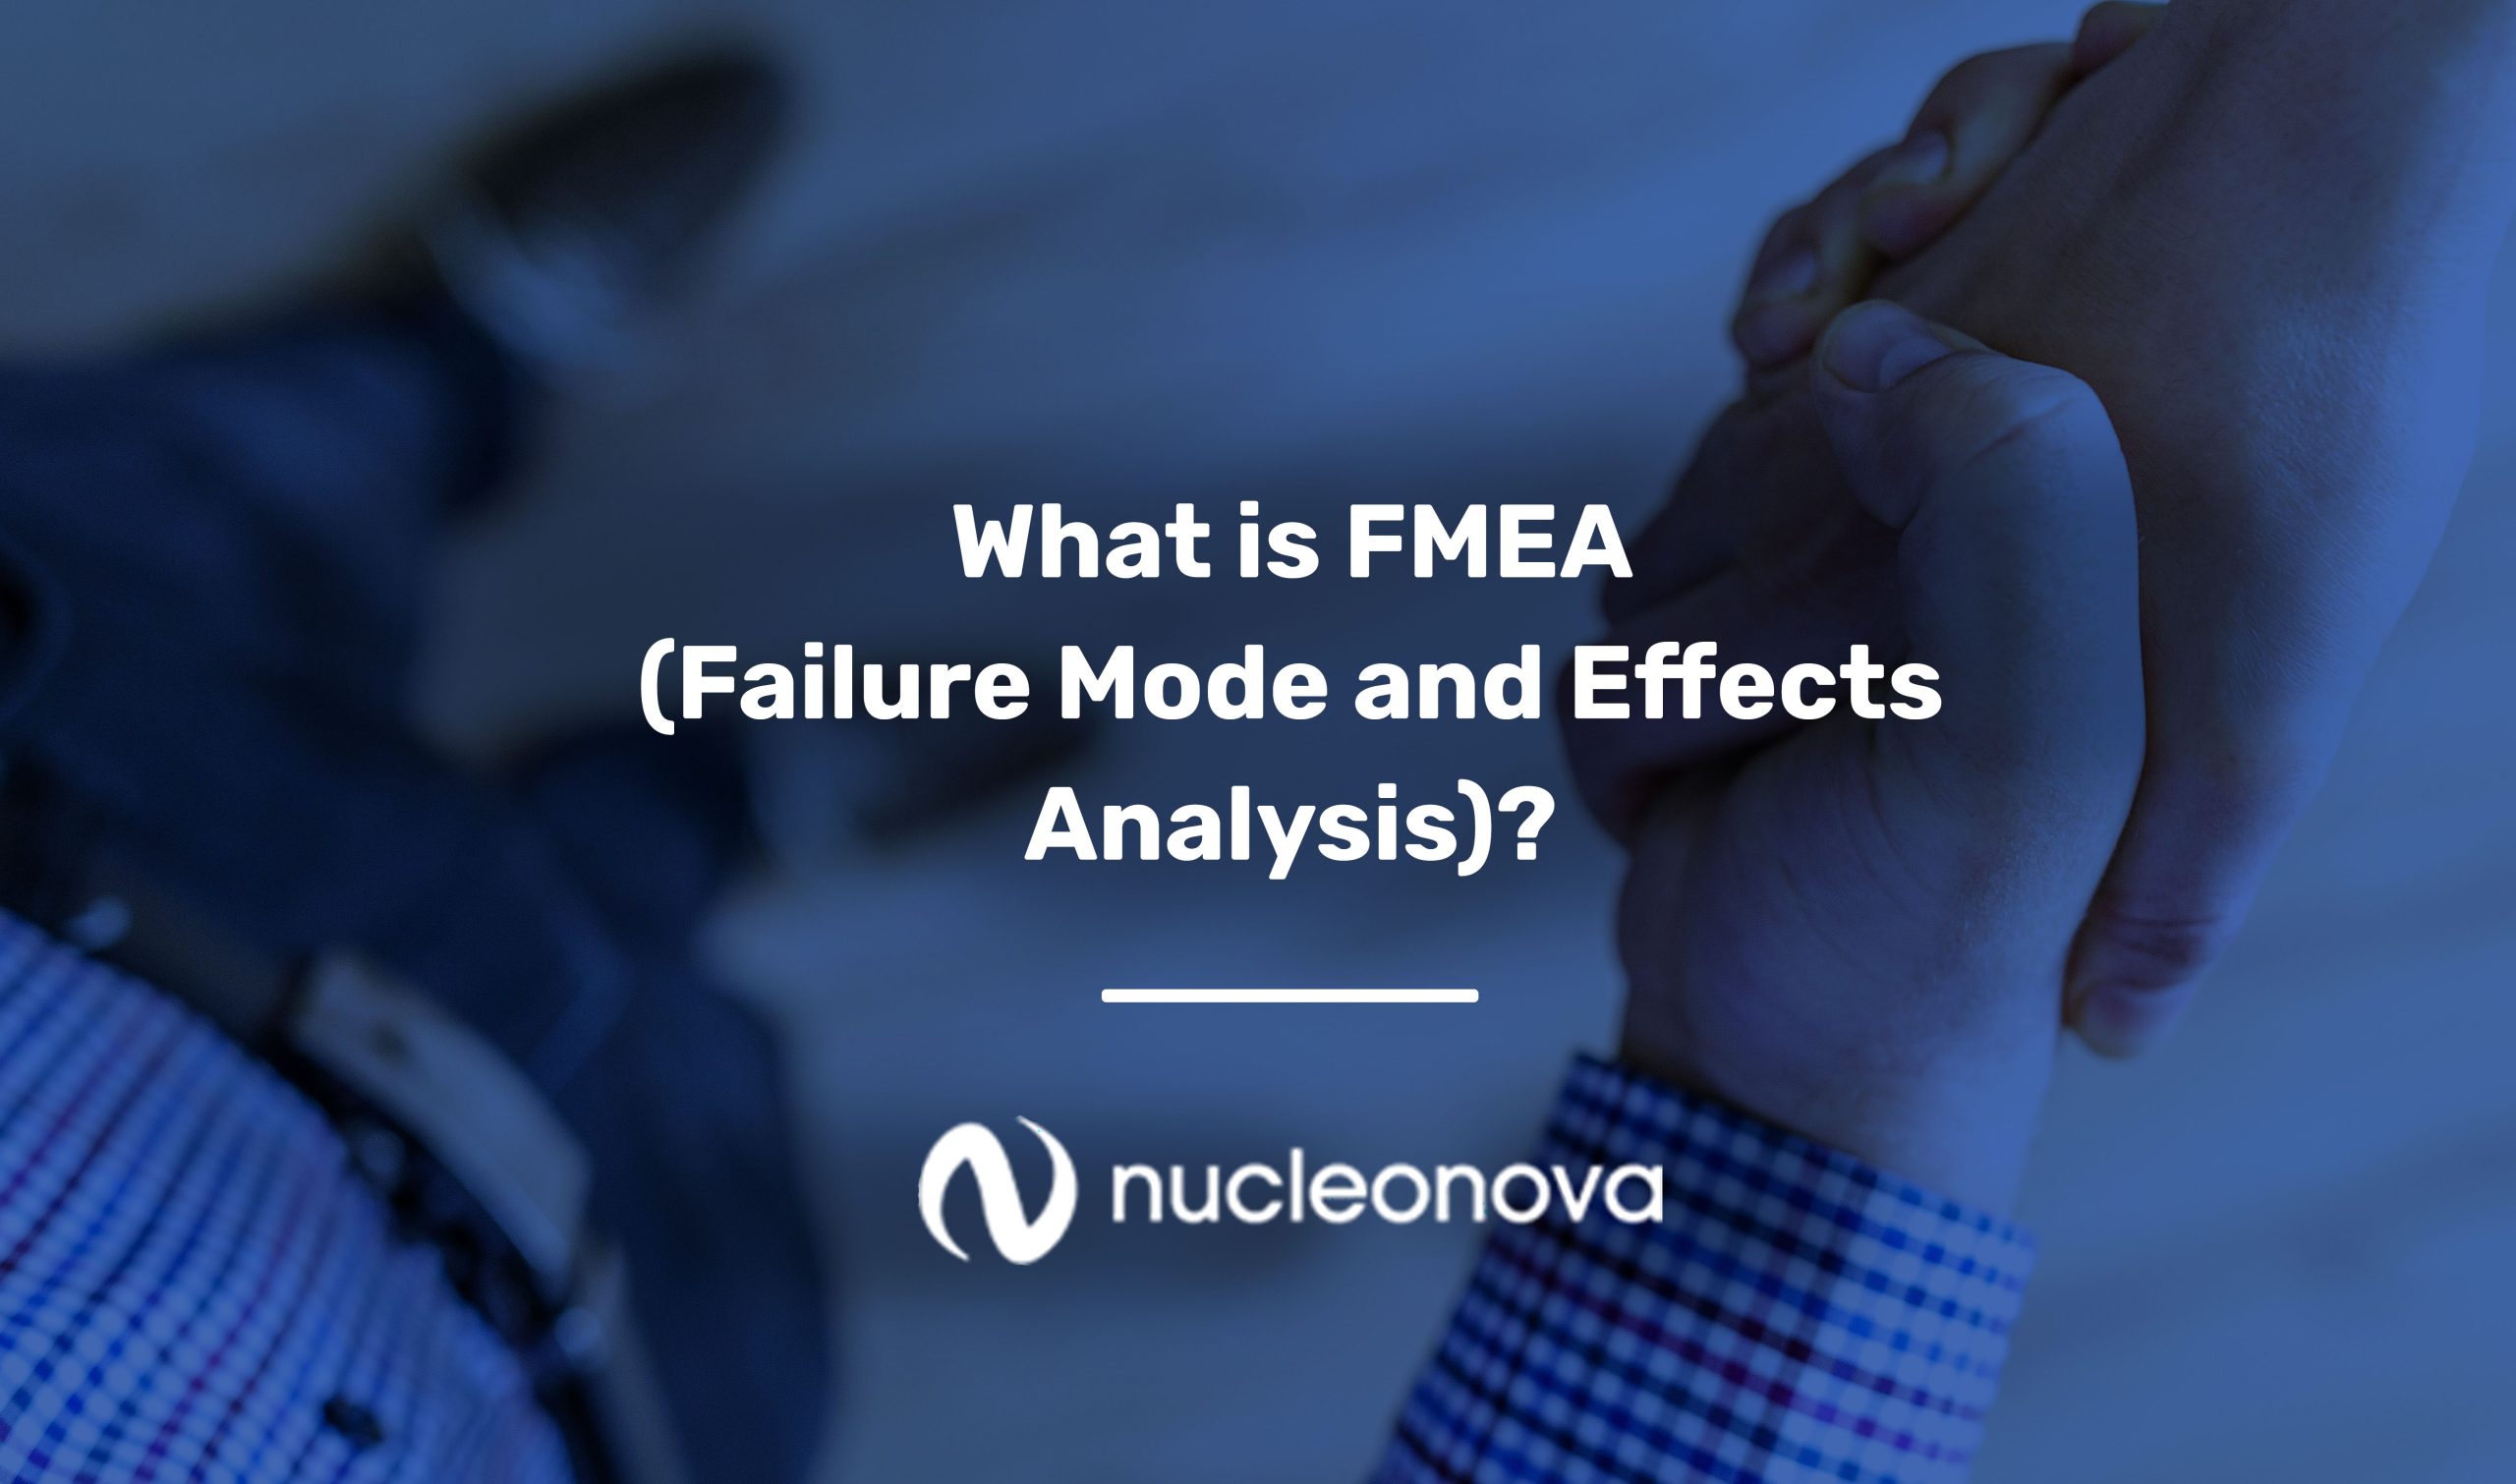 What is FMEA (Failure Mode and Effects Analysis)?